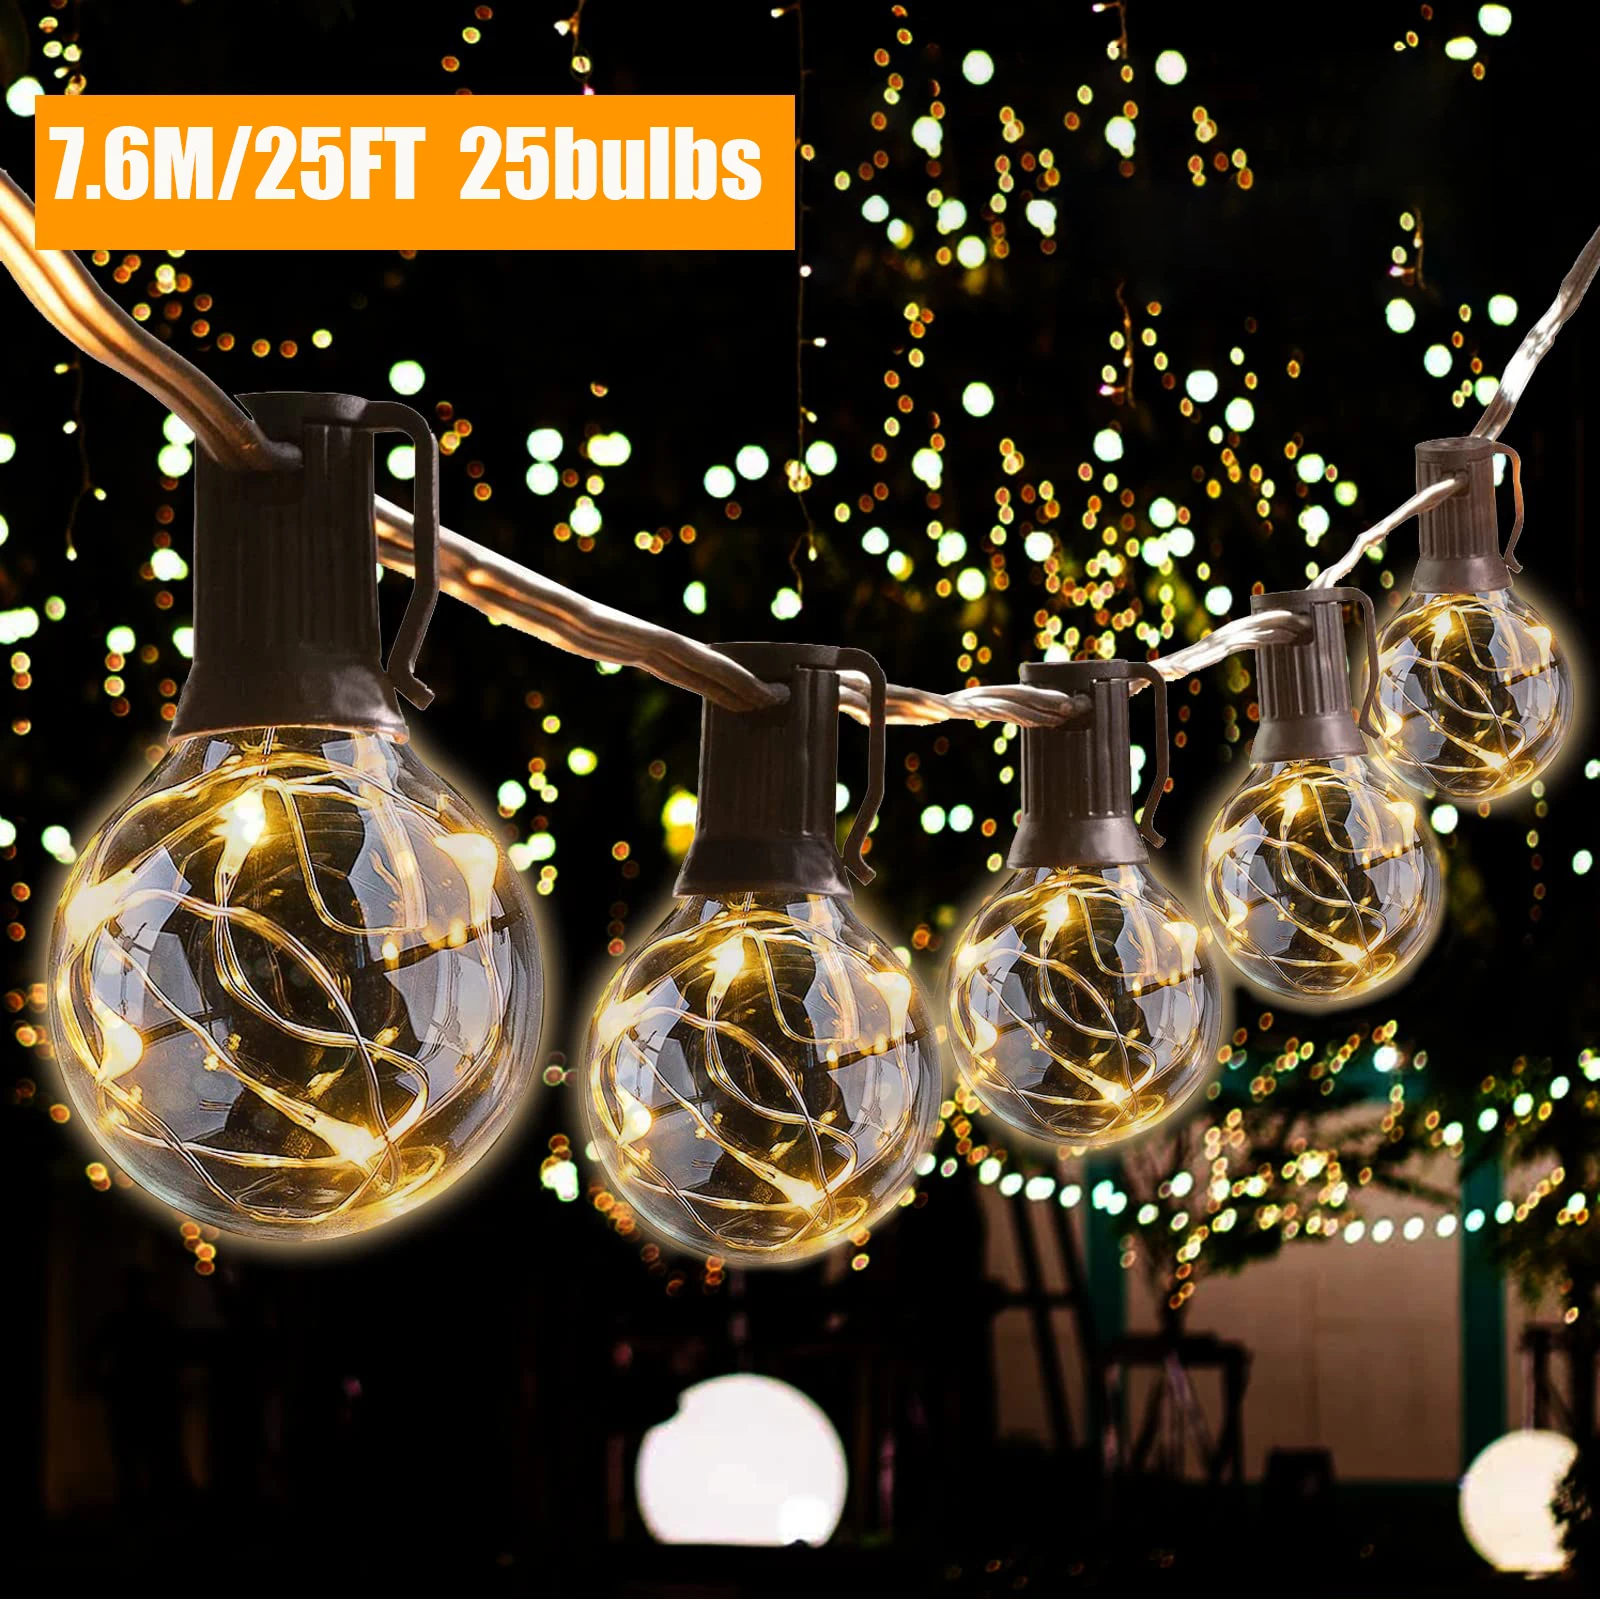 G40 Led String Lights 25FT 25PCS Copper wire LED Bulb Plastic IP45 Waterproof Garland Strings for Patio Christmas Wedding Decor wsdb pv4 2 ip65 in 2 out strings 25a 1000v dc solar pv array plastic combiner box